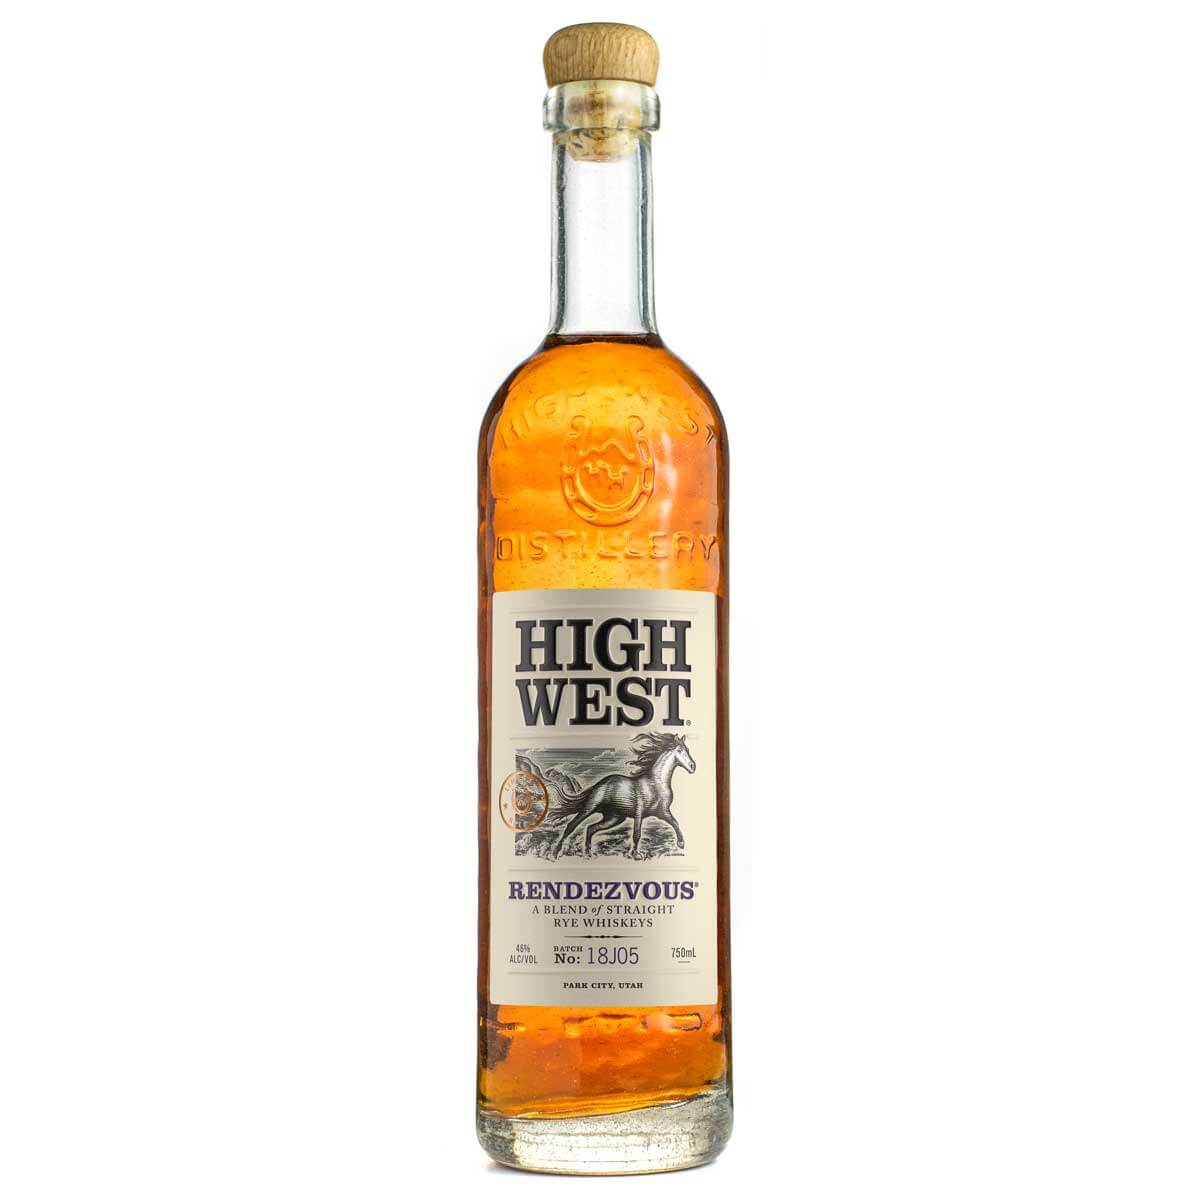 High West Rendezvous Rye bottle